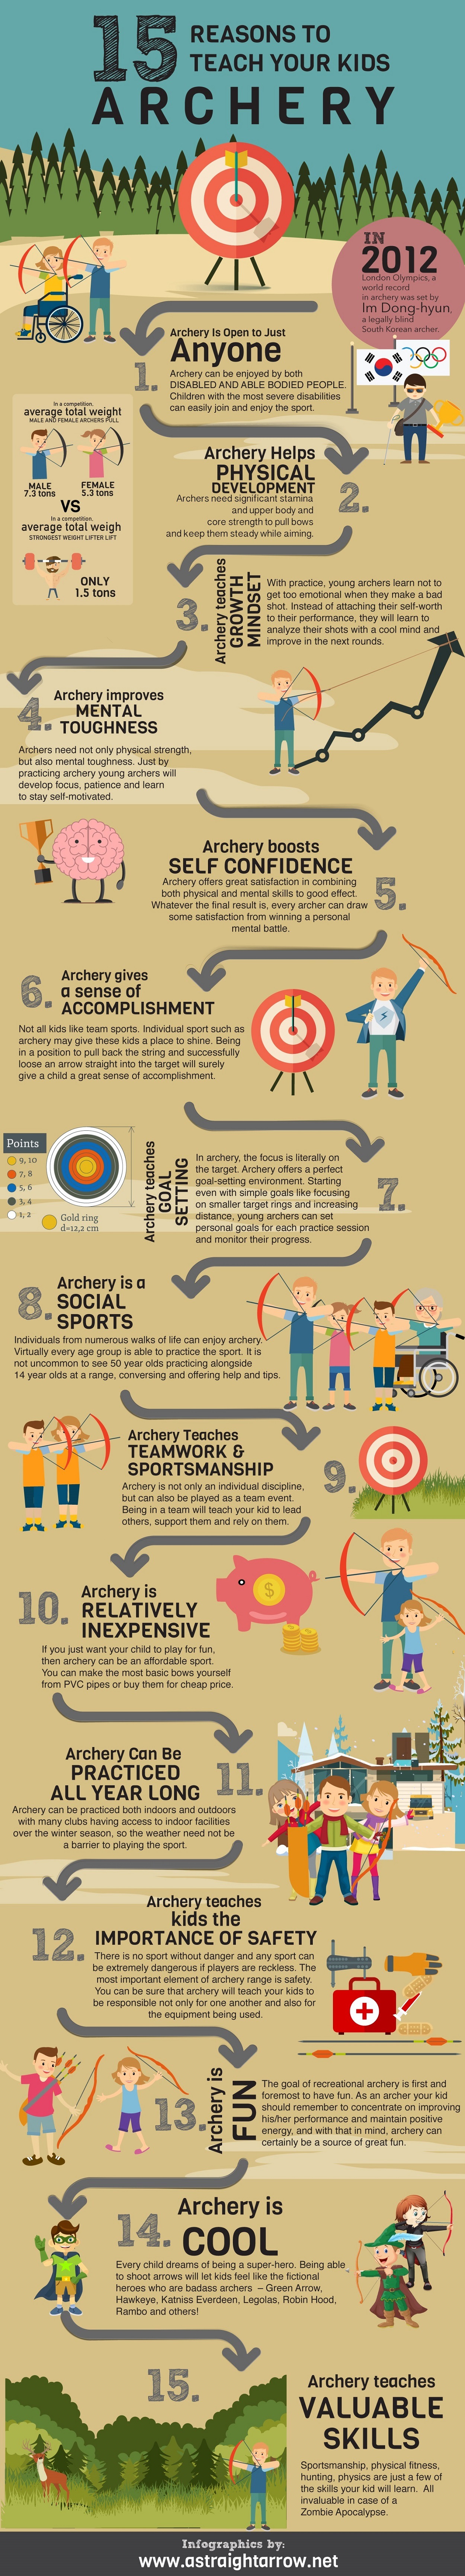 15-reasons-to-teach-your-kids-archery